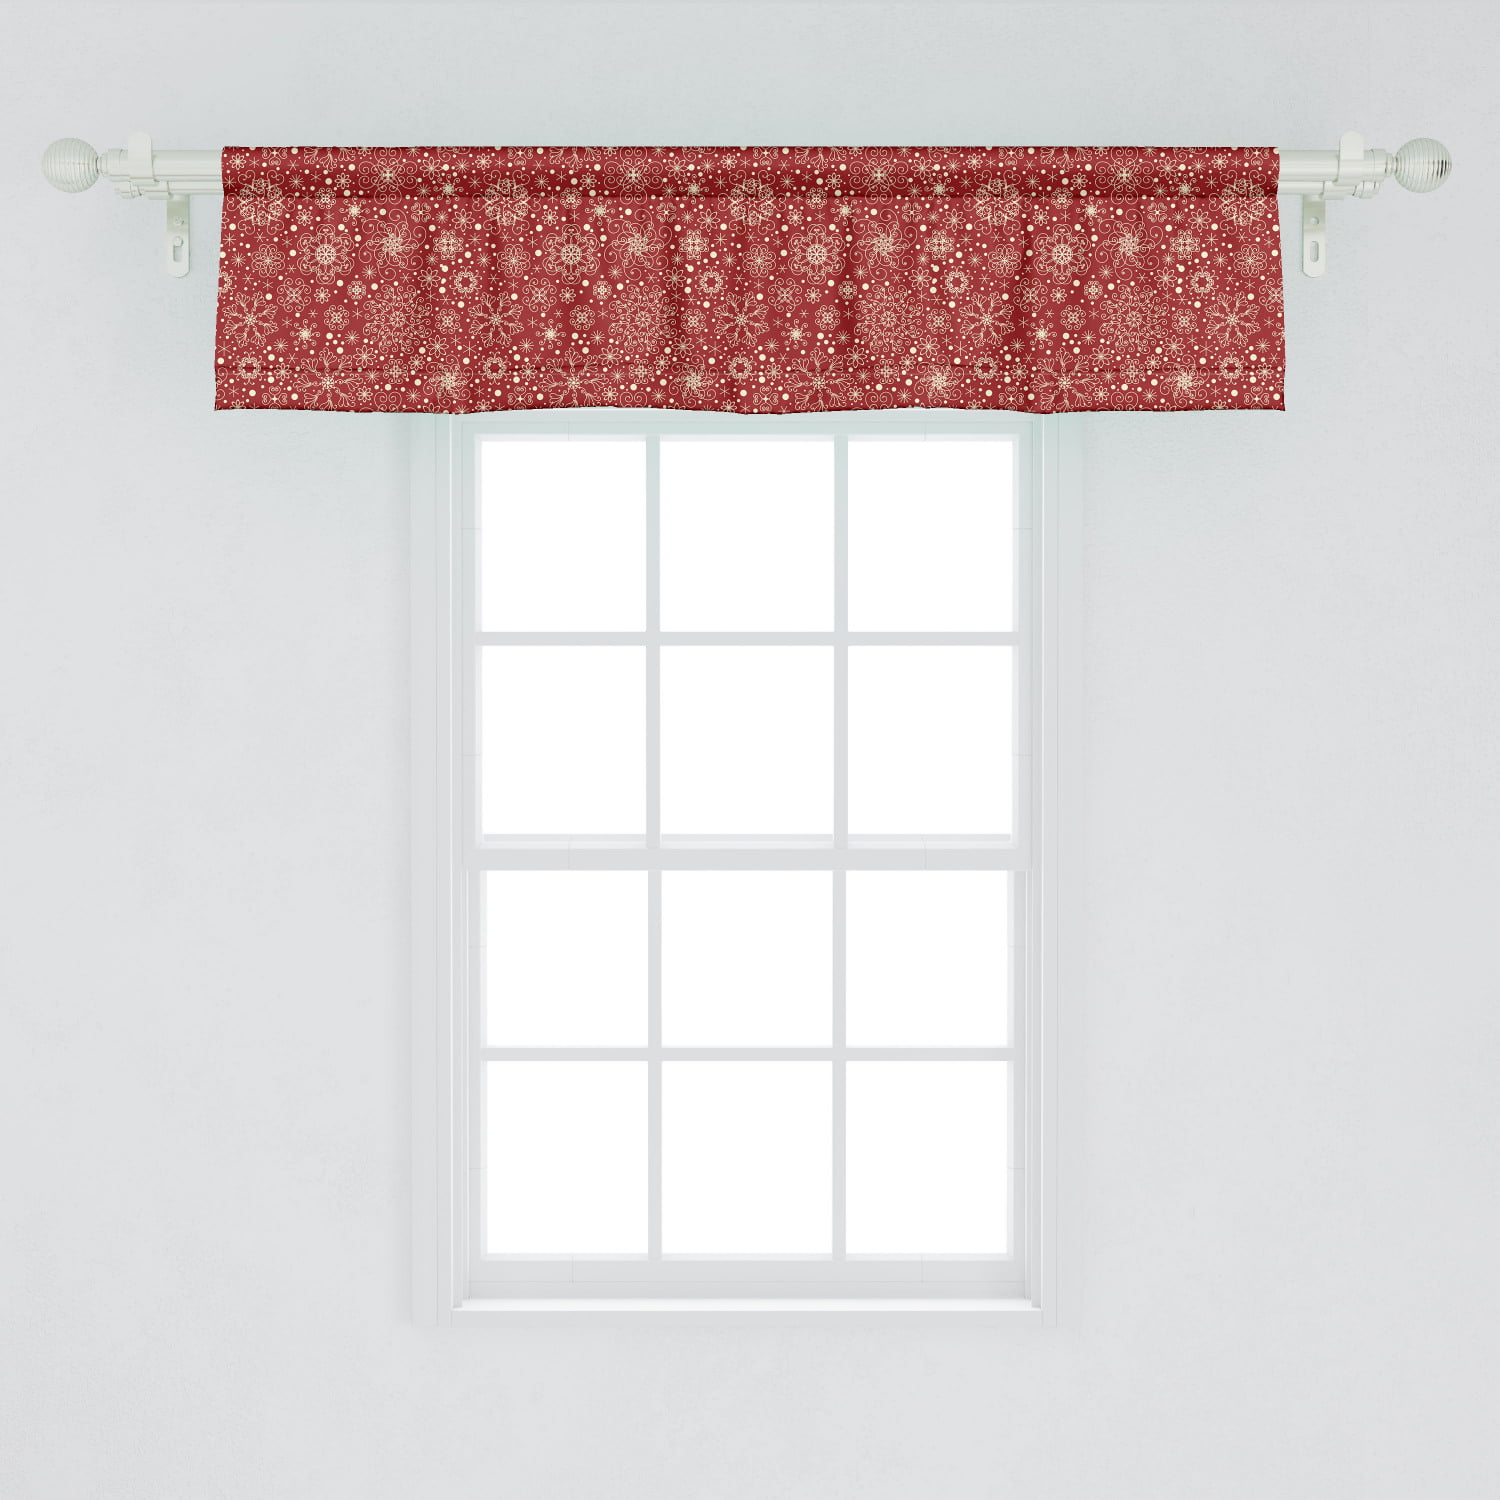 3 pc Curtains Set: 2 Tiers & Valance SNOWFLAKES ON RED,BH CHRISTMAS 58" x 14" 